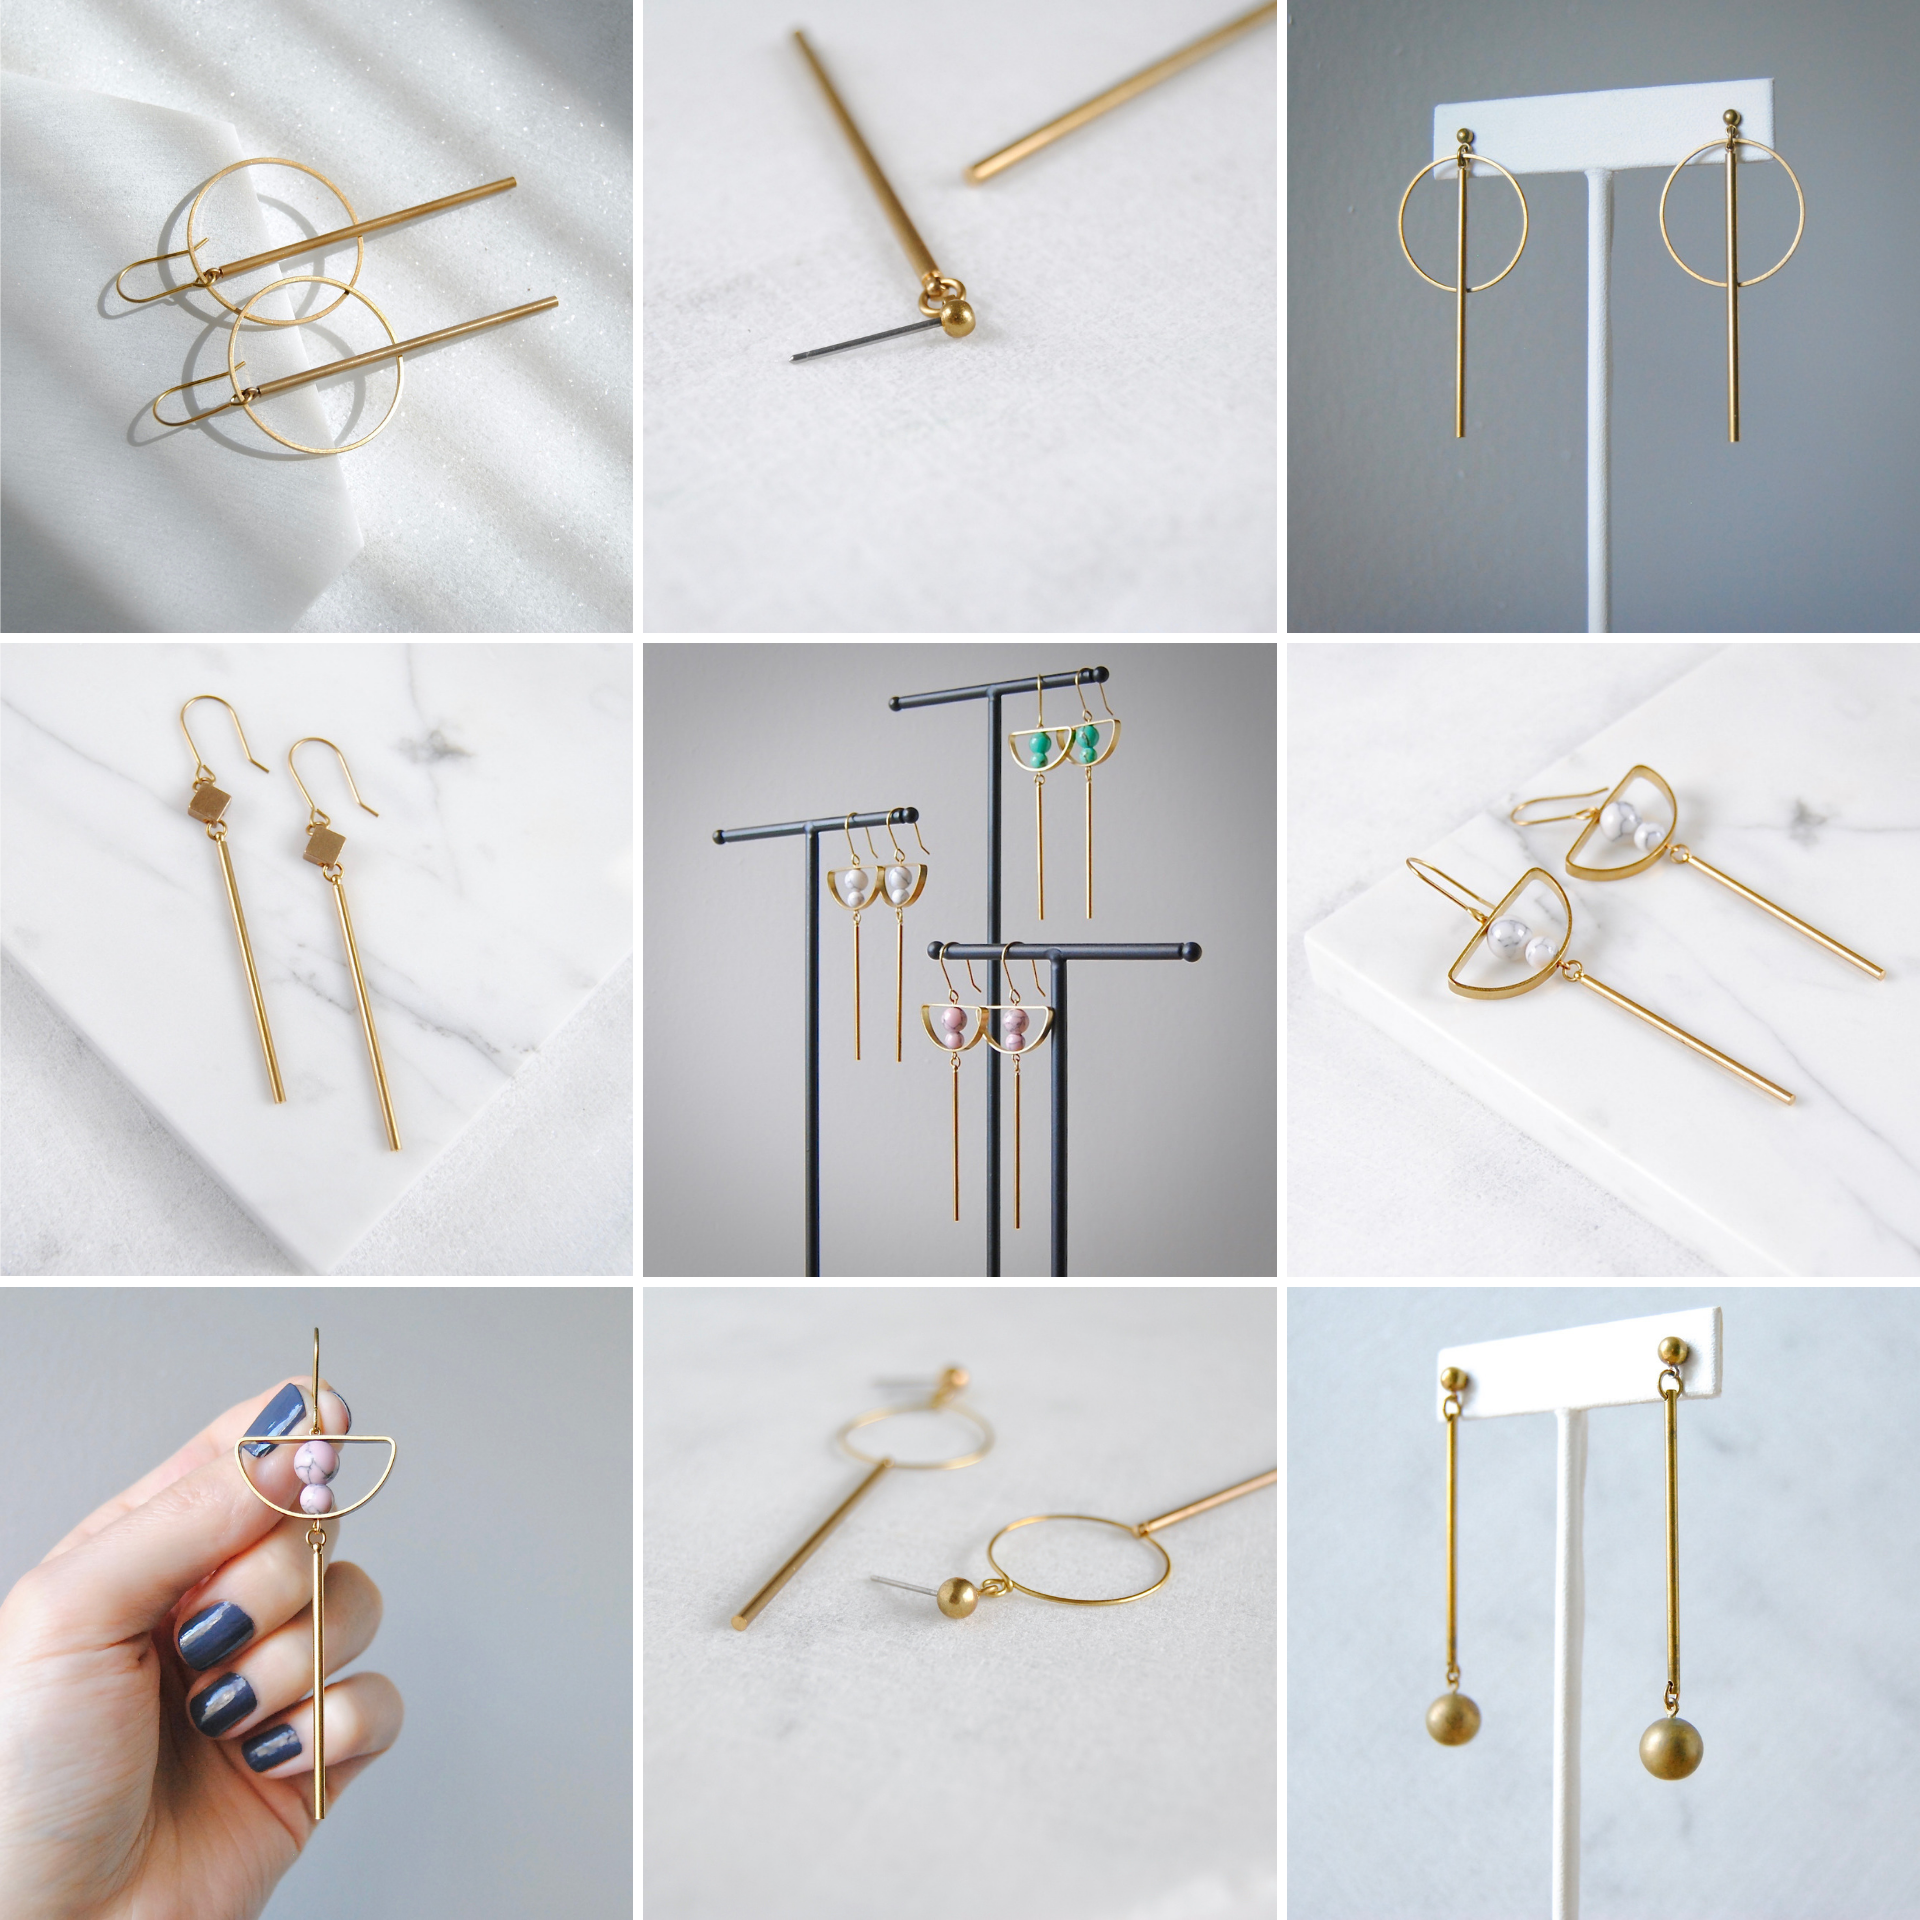 MANY BAR EARRING STYLES AVAILABLE